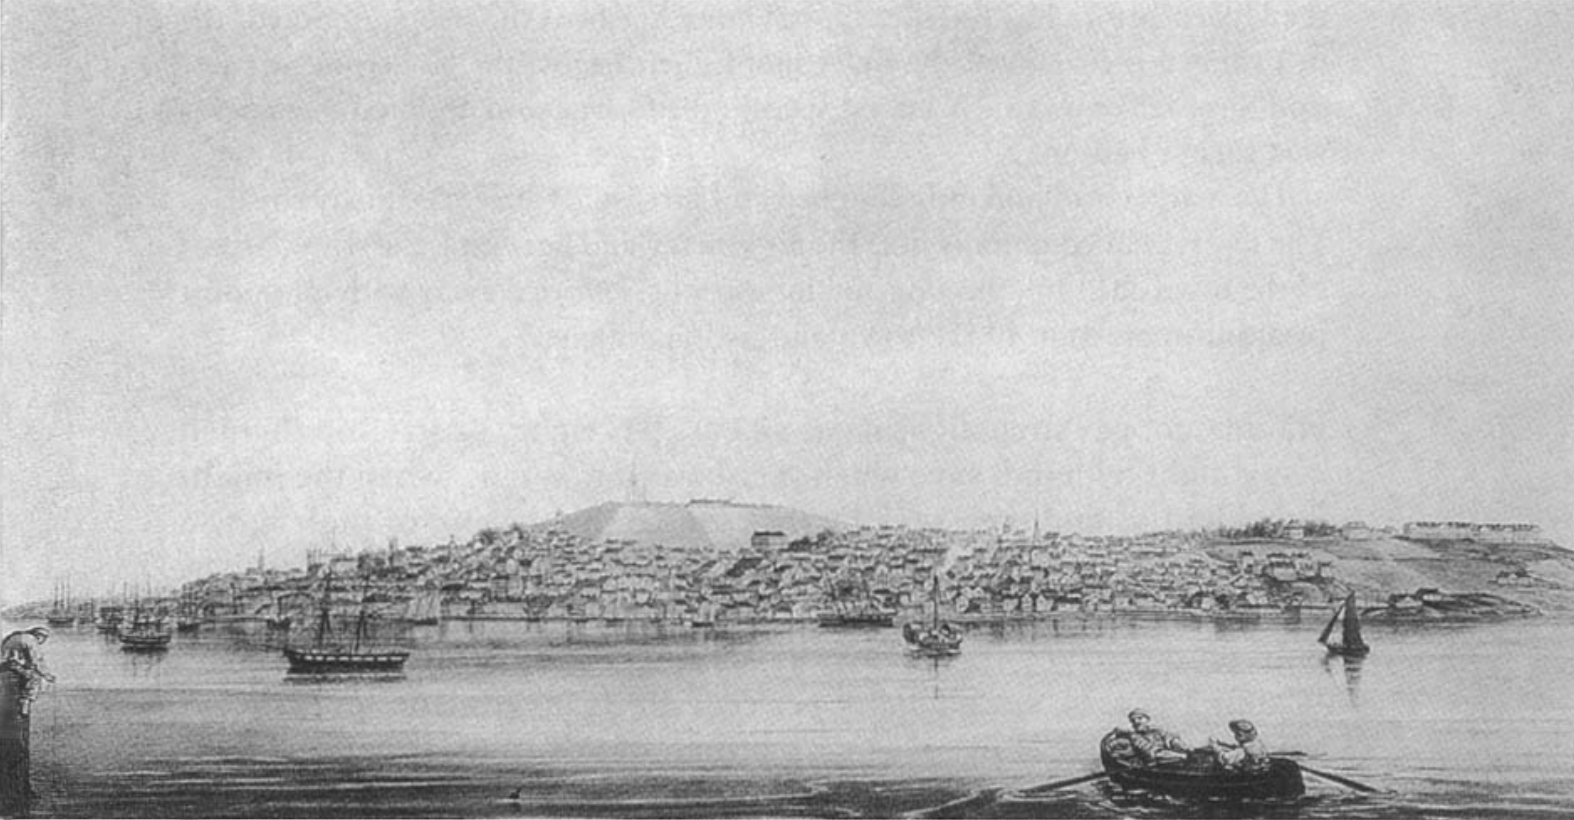 Black and white image of painting by William Hickman of Halifax in 1860, from the Dartmouth side of the harbour